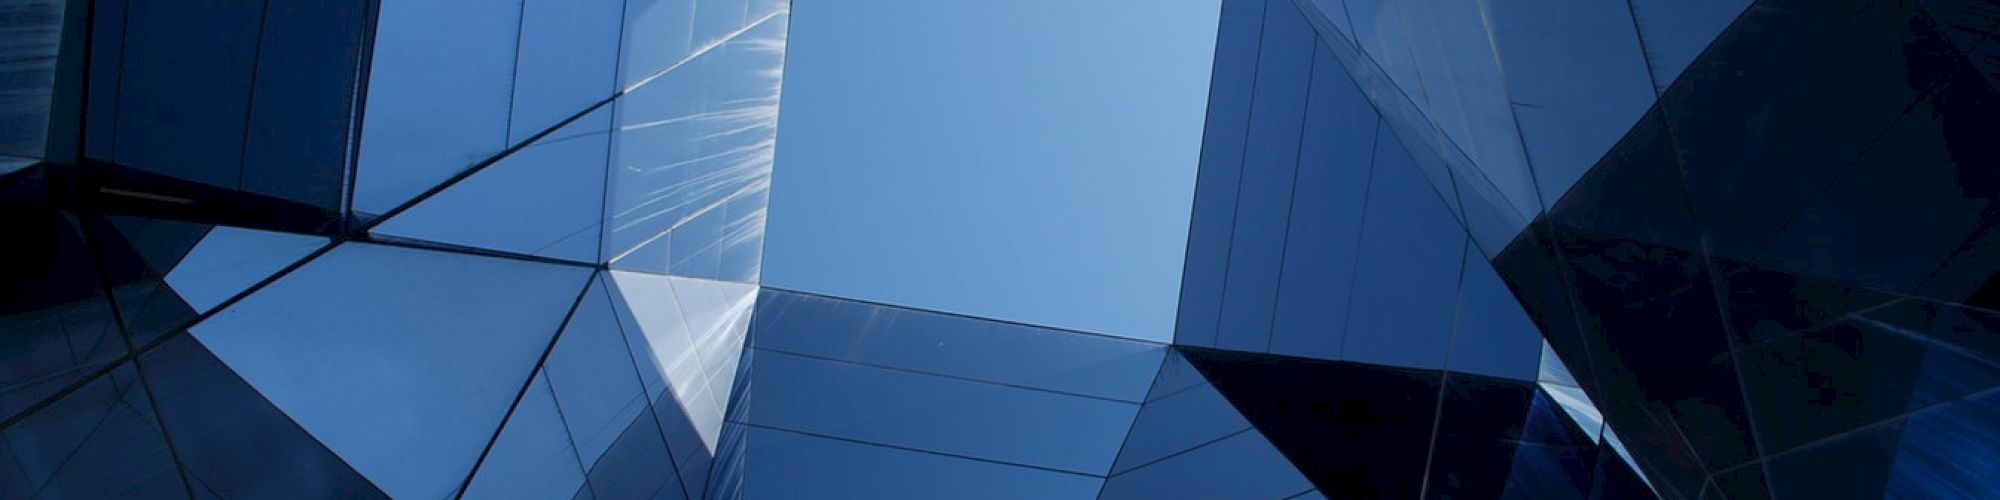 View of geometric glass structures forming an abstract pattern with a central opening to the sky, producing a reflective and mirrored effect.